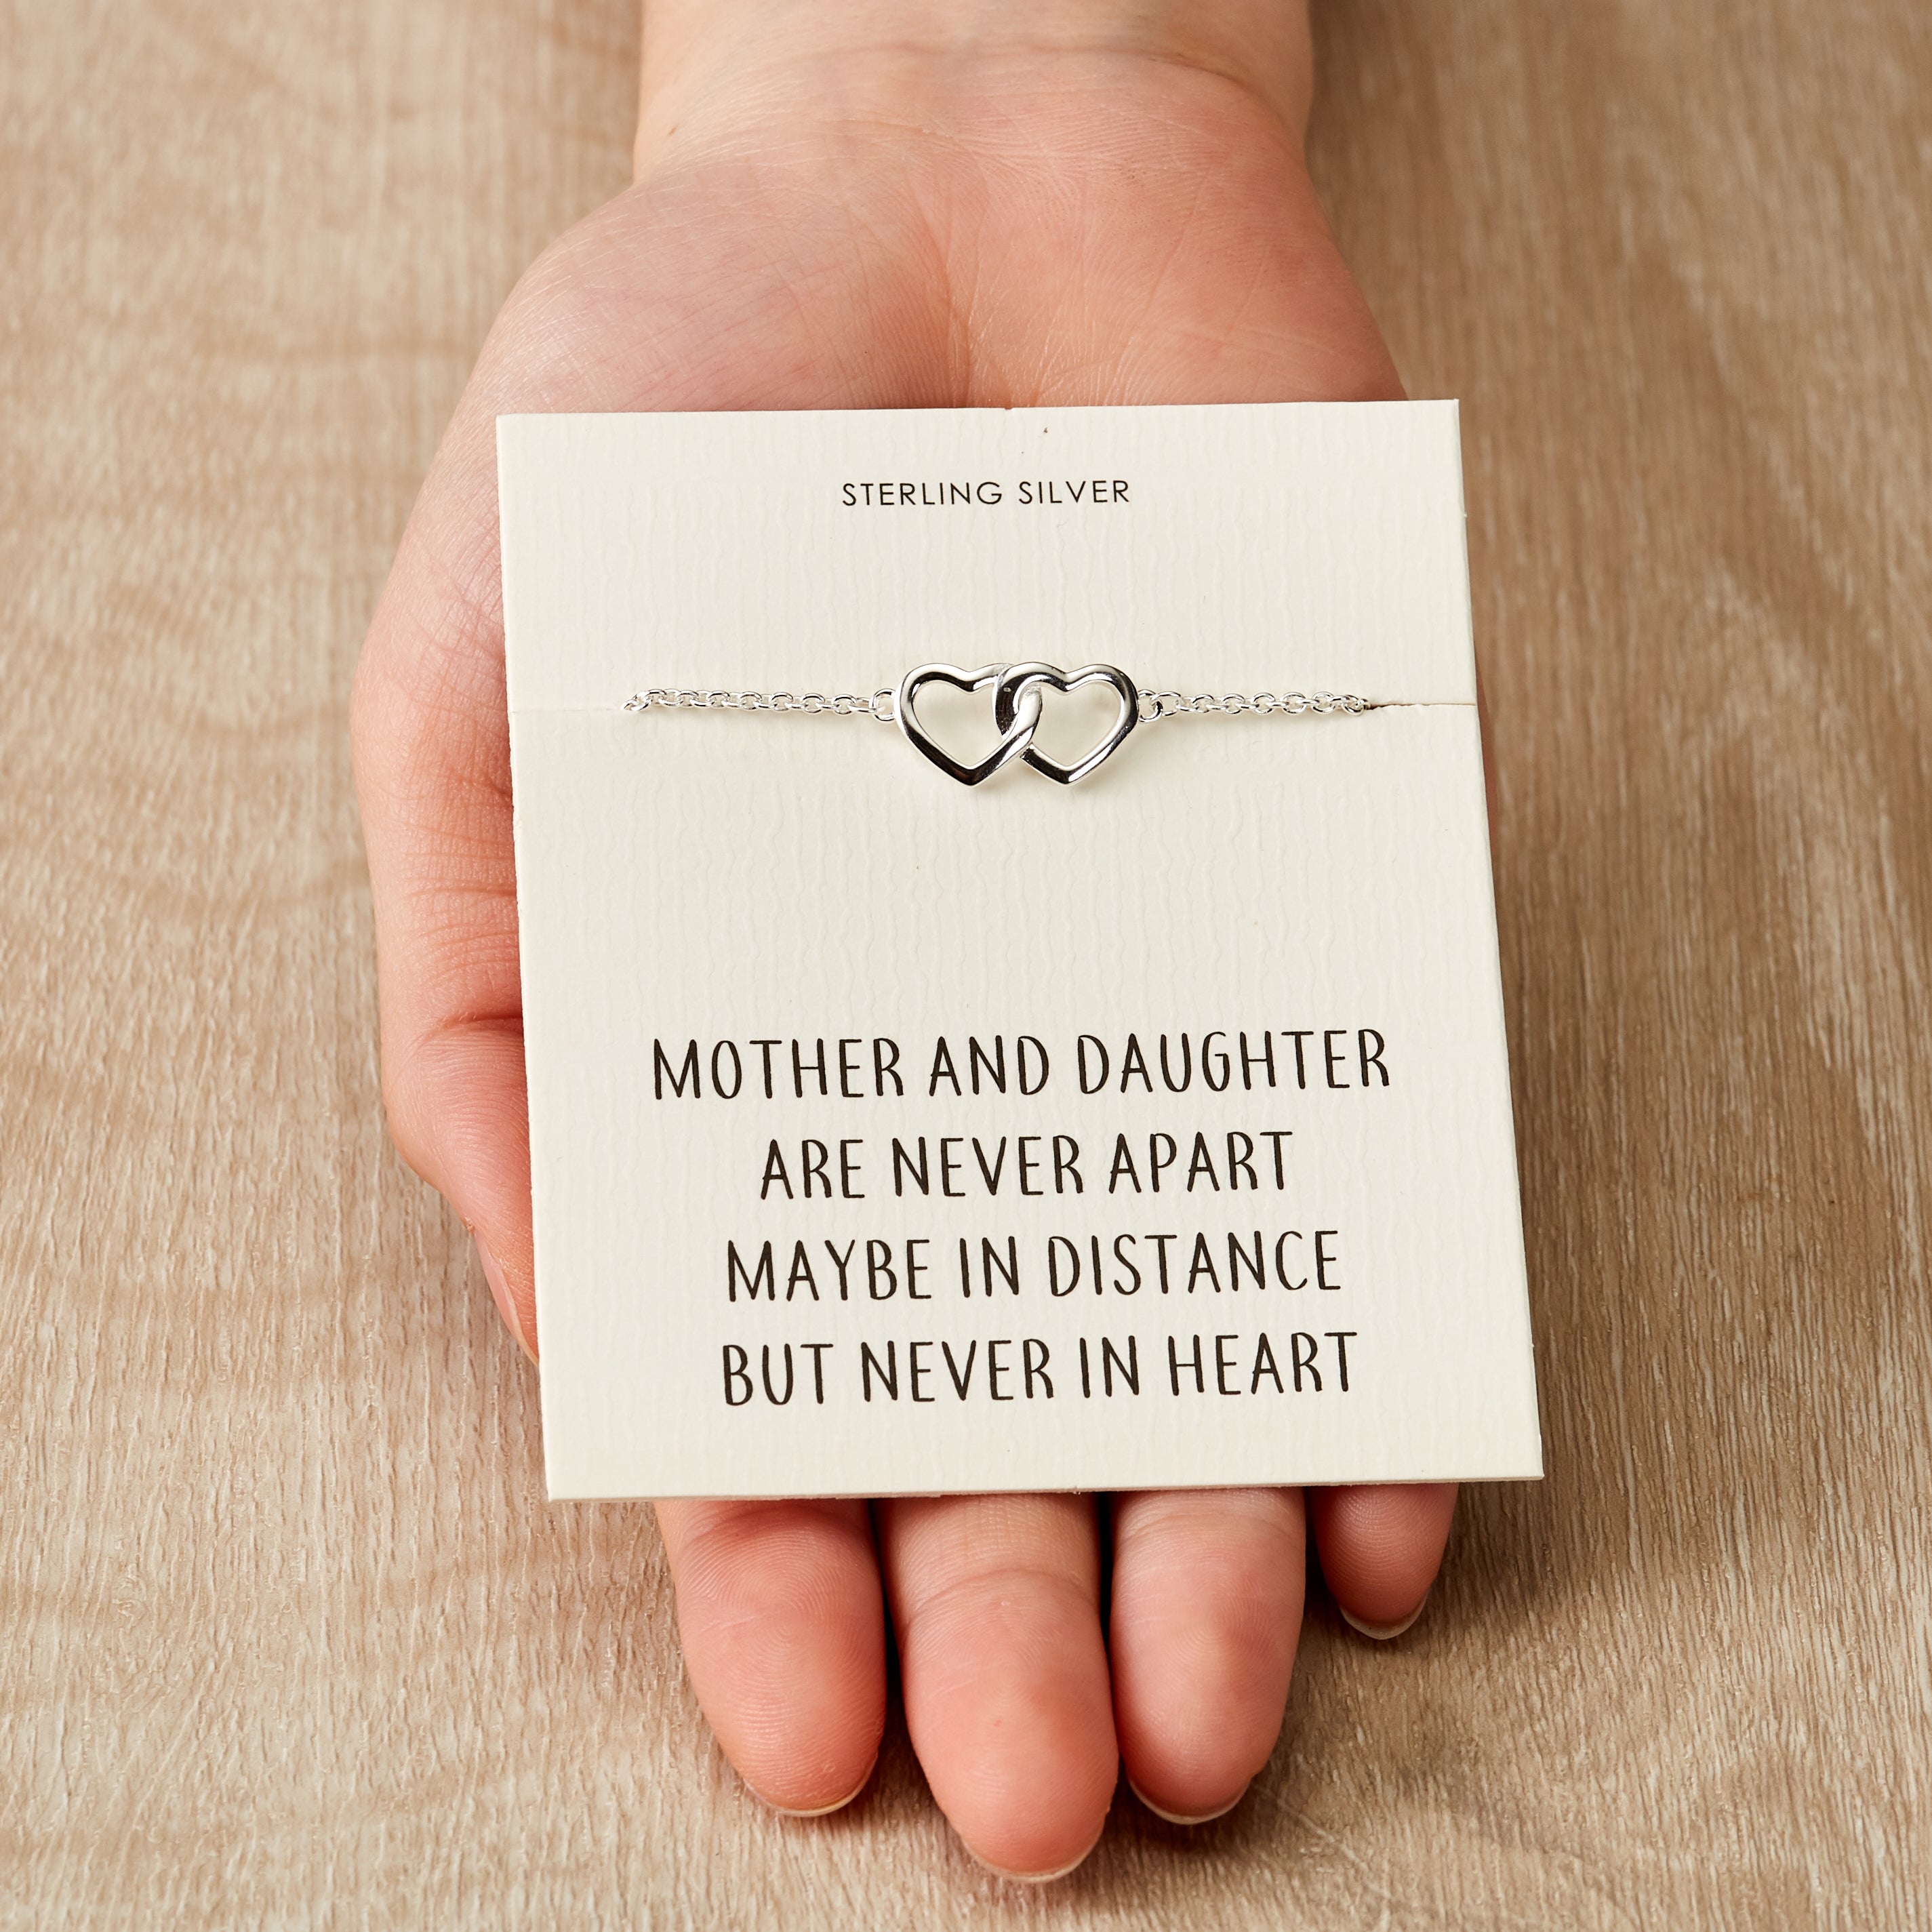 Sterling Silver Mother and Daughter Quote Heart Link Bracelet